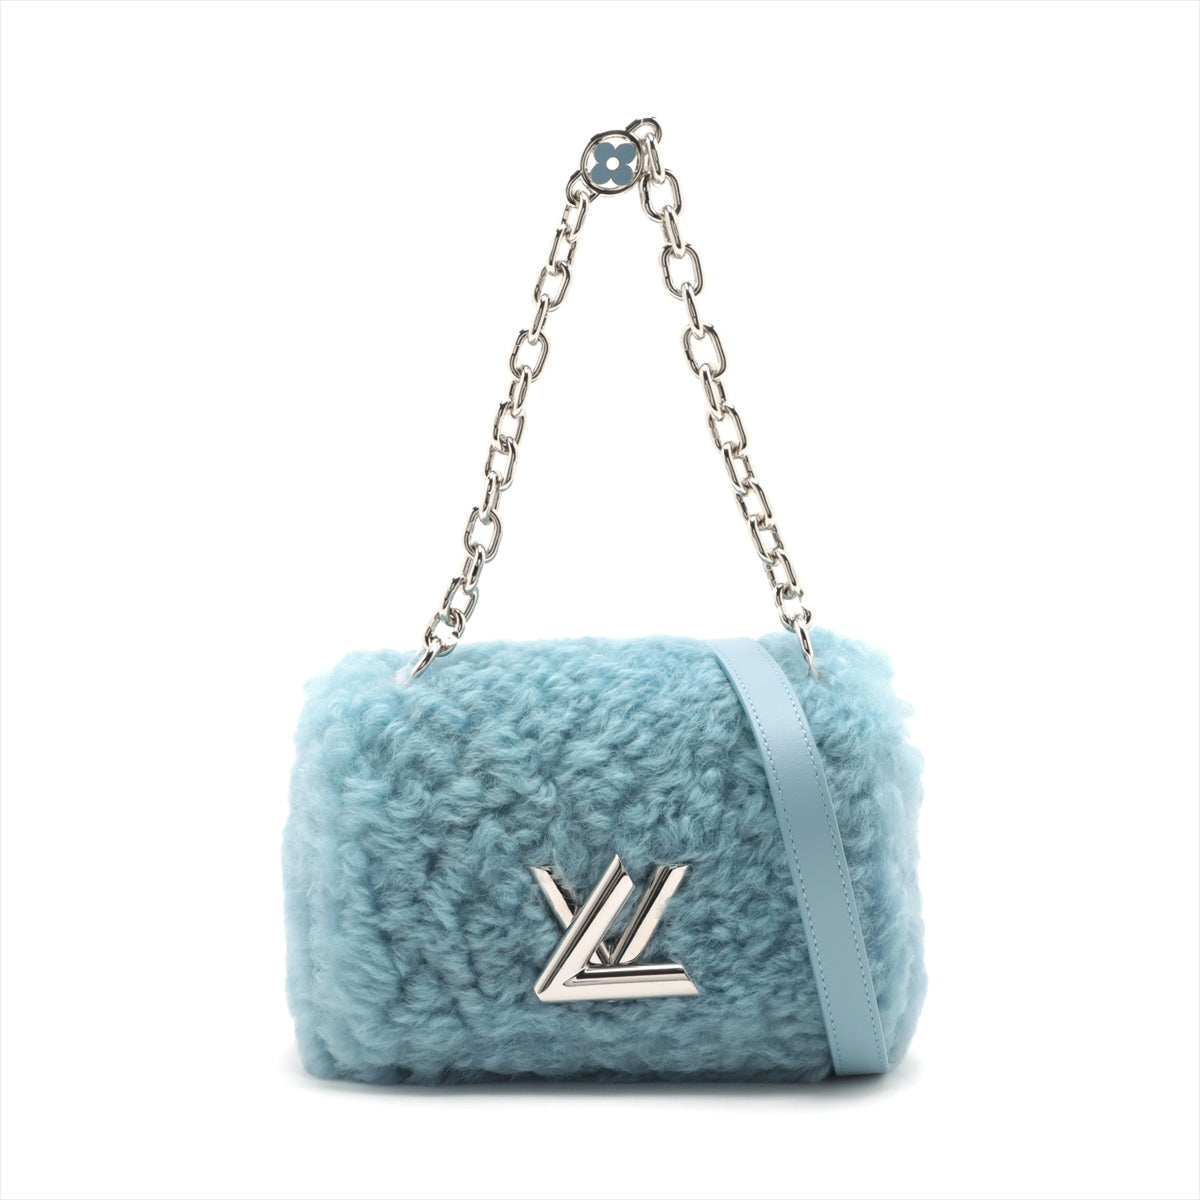 Louis Vuitton Shearing Twist MM M21040  There was an RFID response